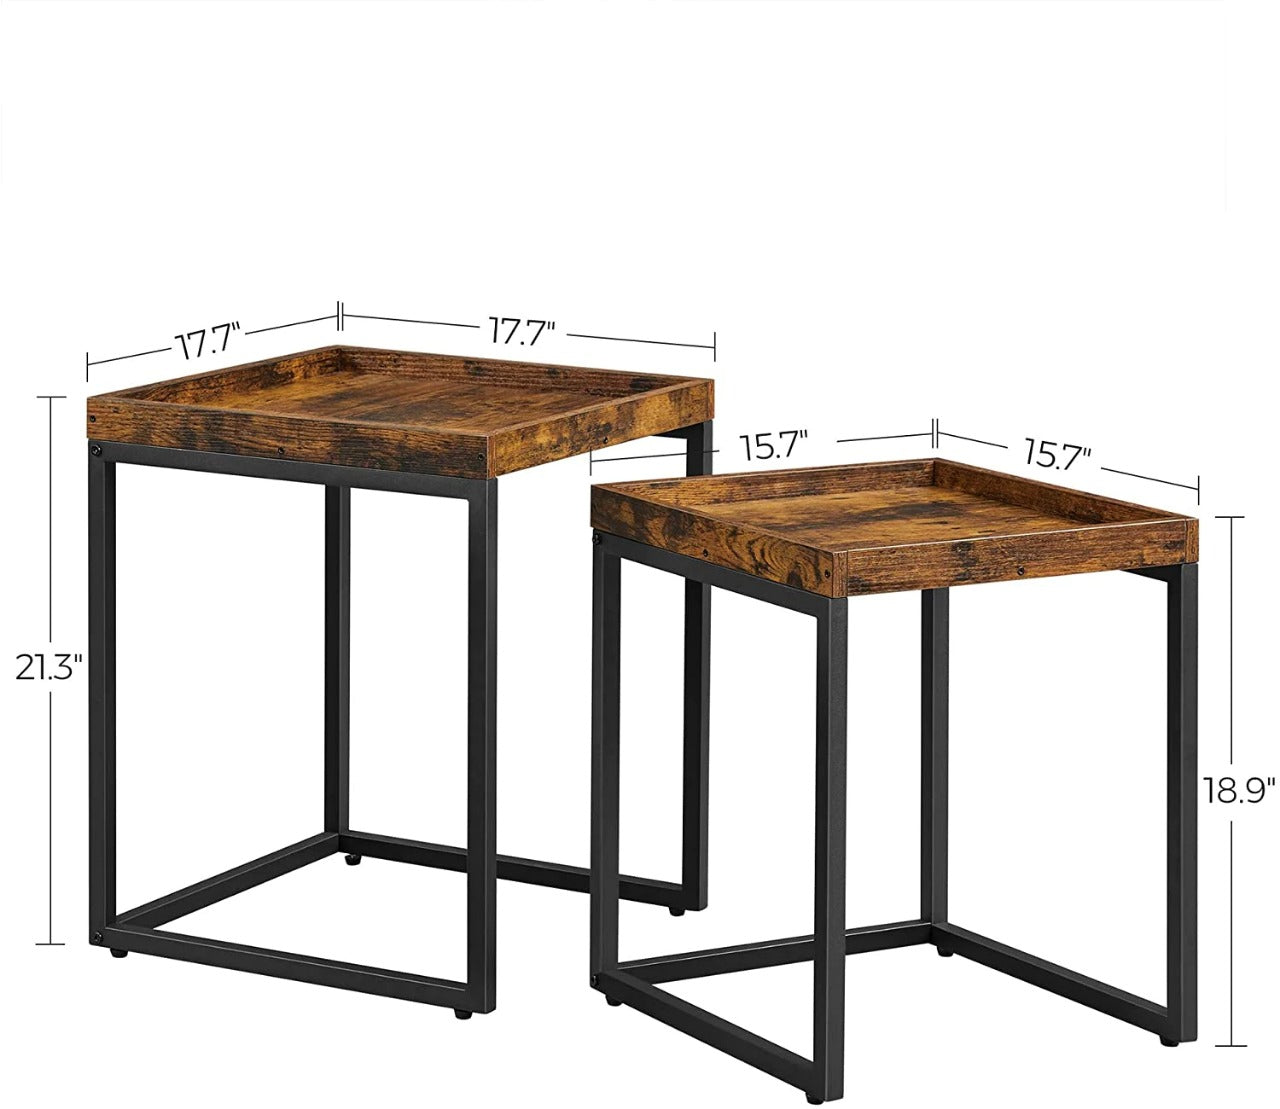 Nest Of Tables: 2 Side Tables, End Tables with Raised Edges, Coffee Tables for Living Room, Industrial Rustic Brown and Black